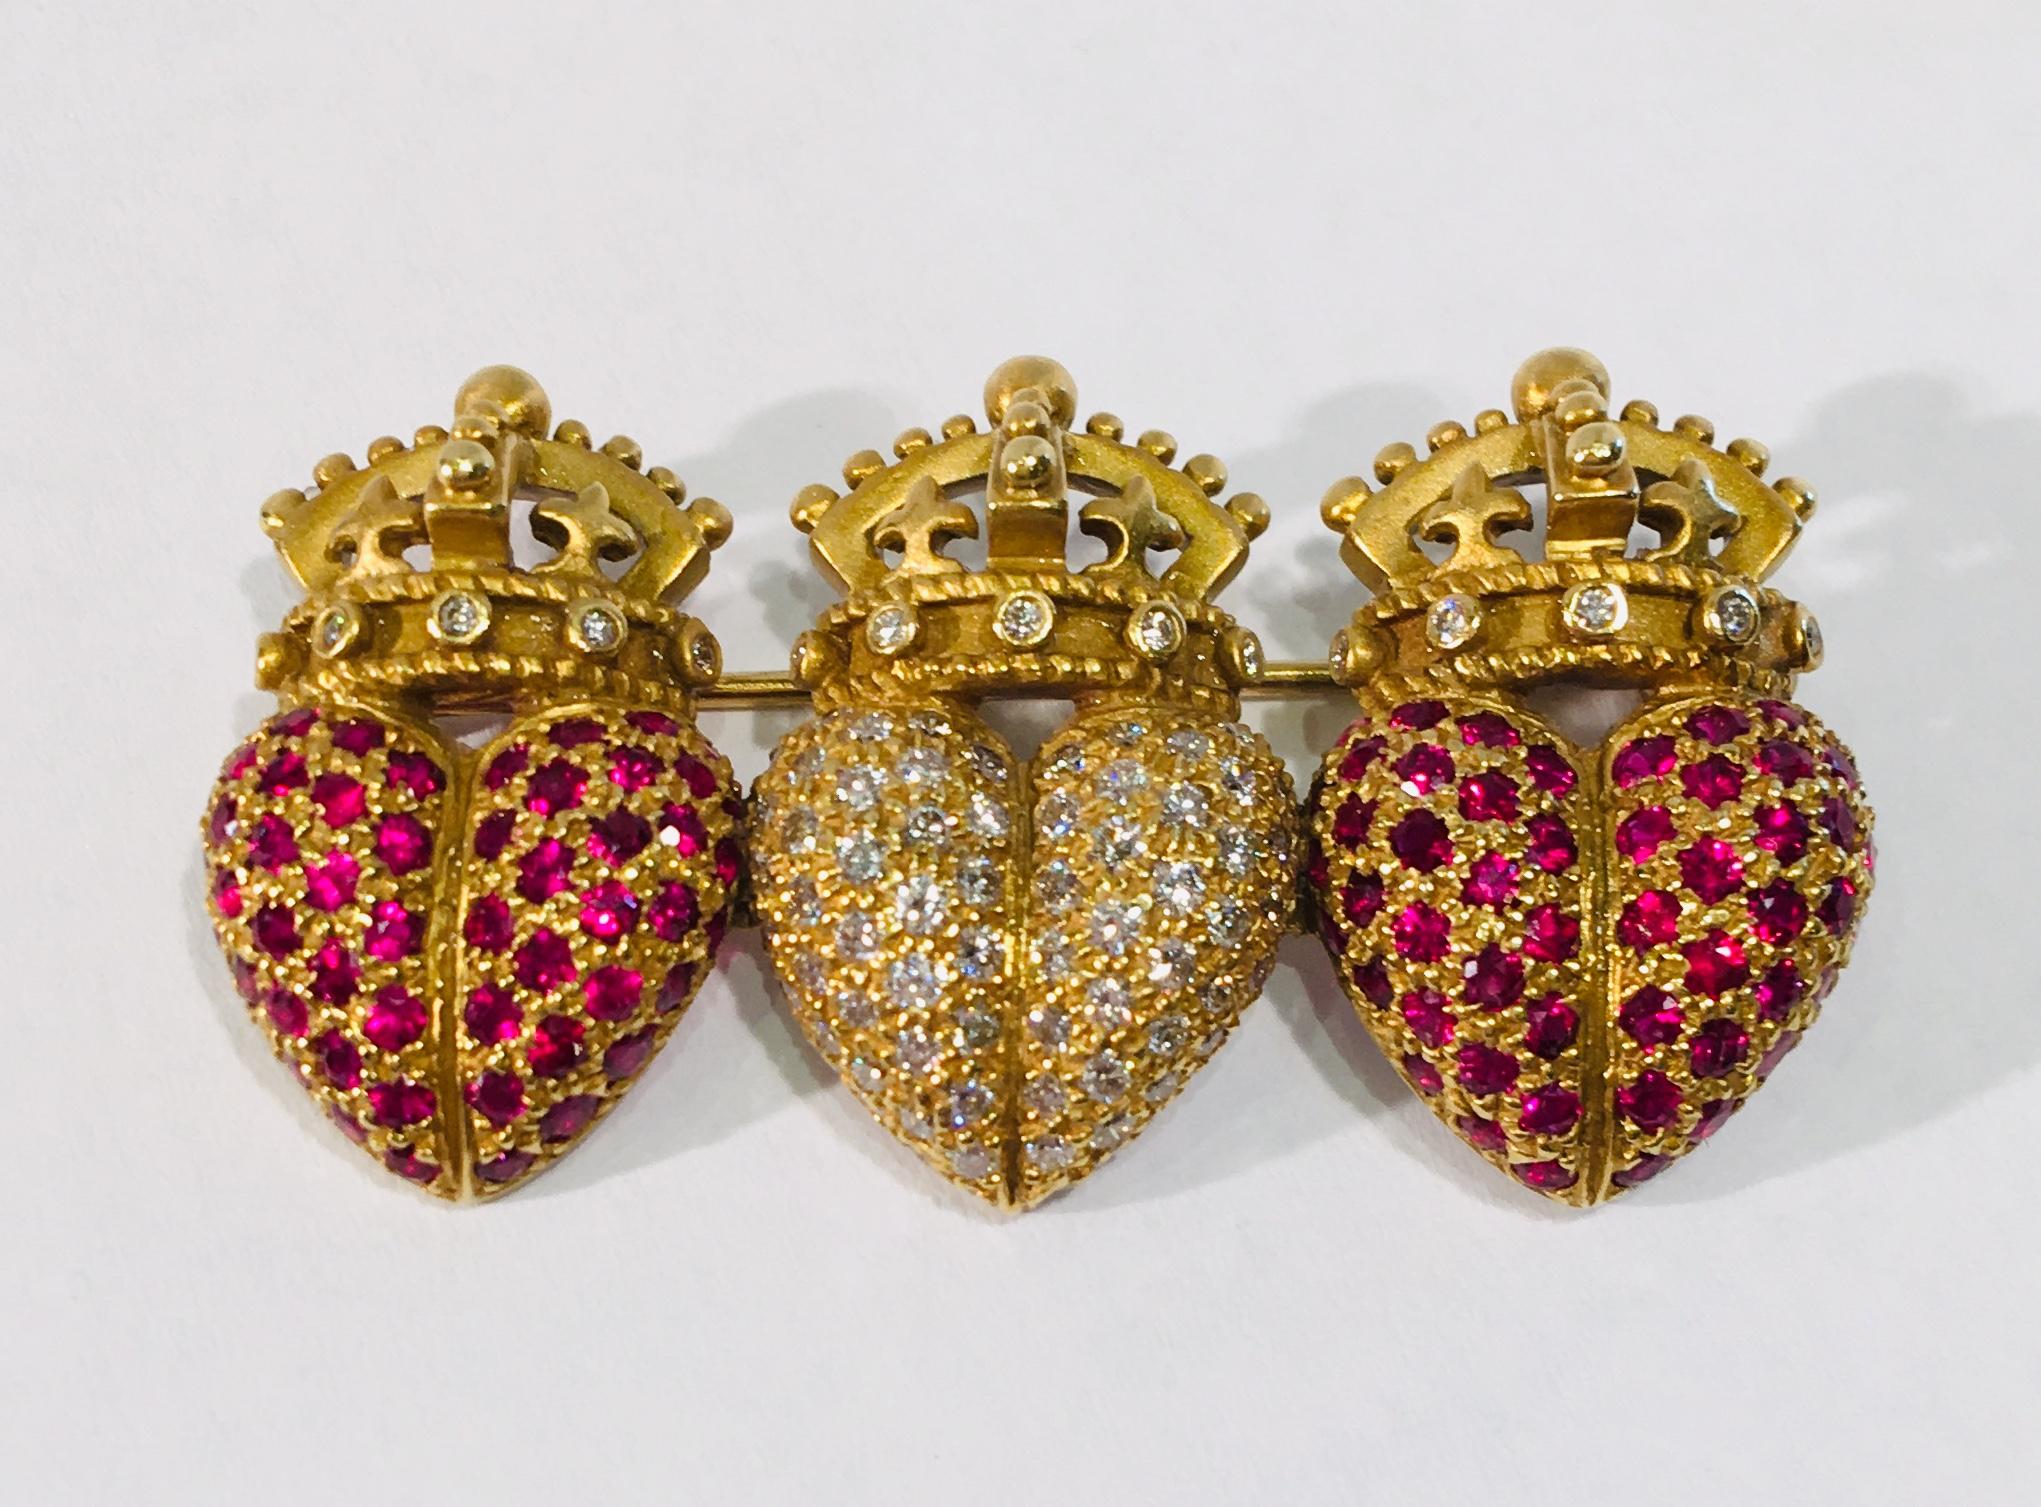 Contemporary Designer Kieselstein-Cord 1987 Royal Hearts 3 Ruby and Diamond Hearts Brooch Pin